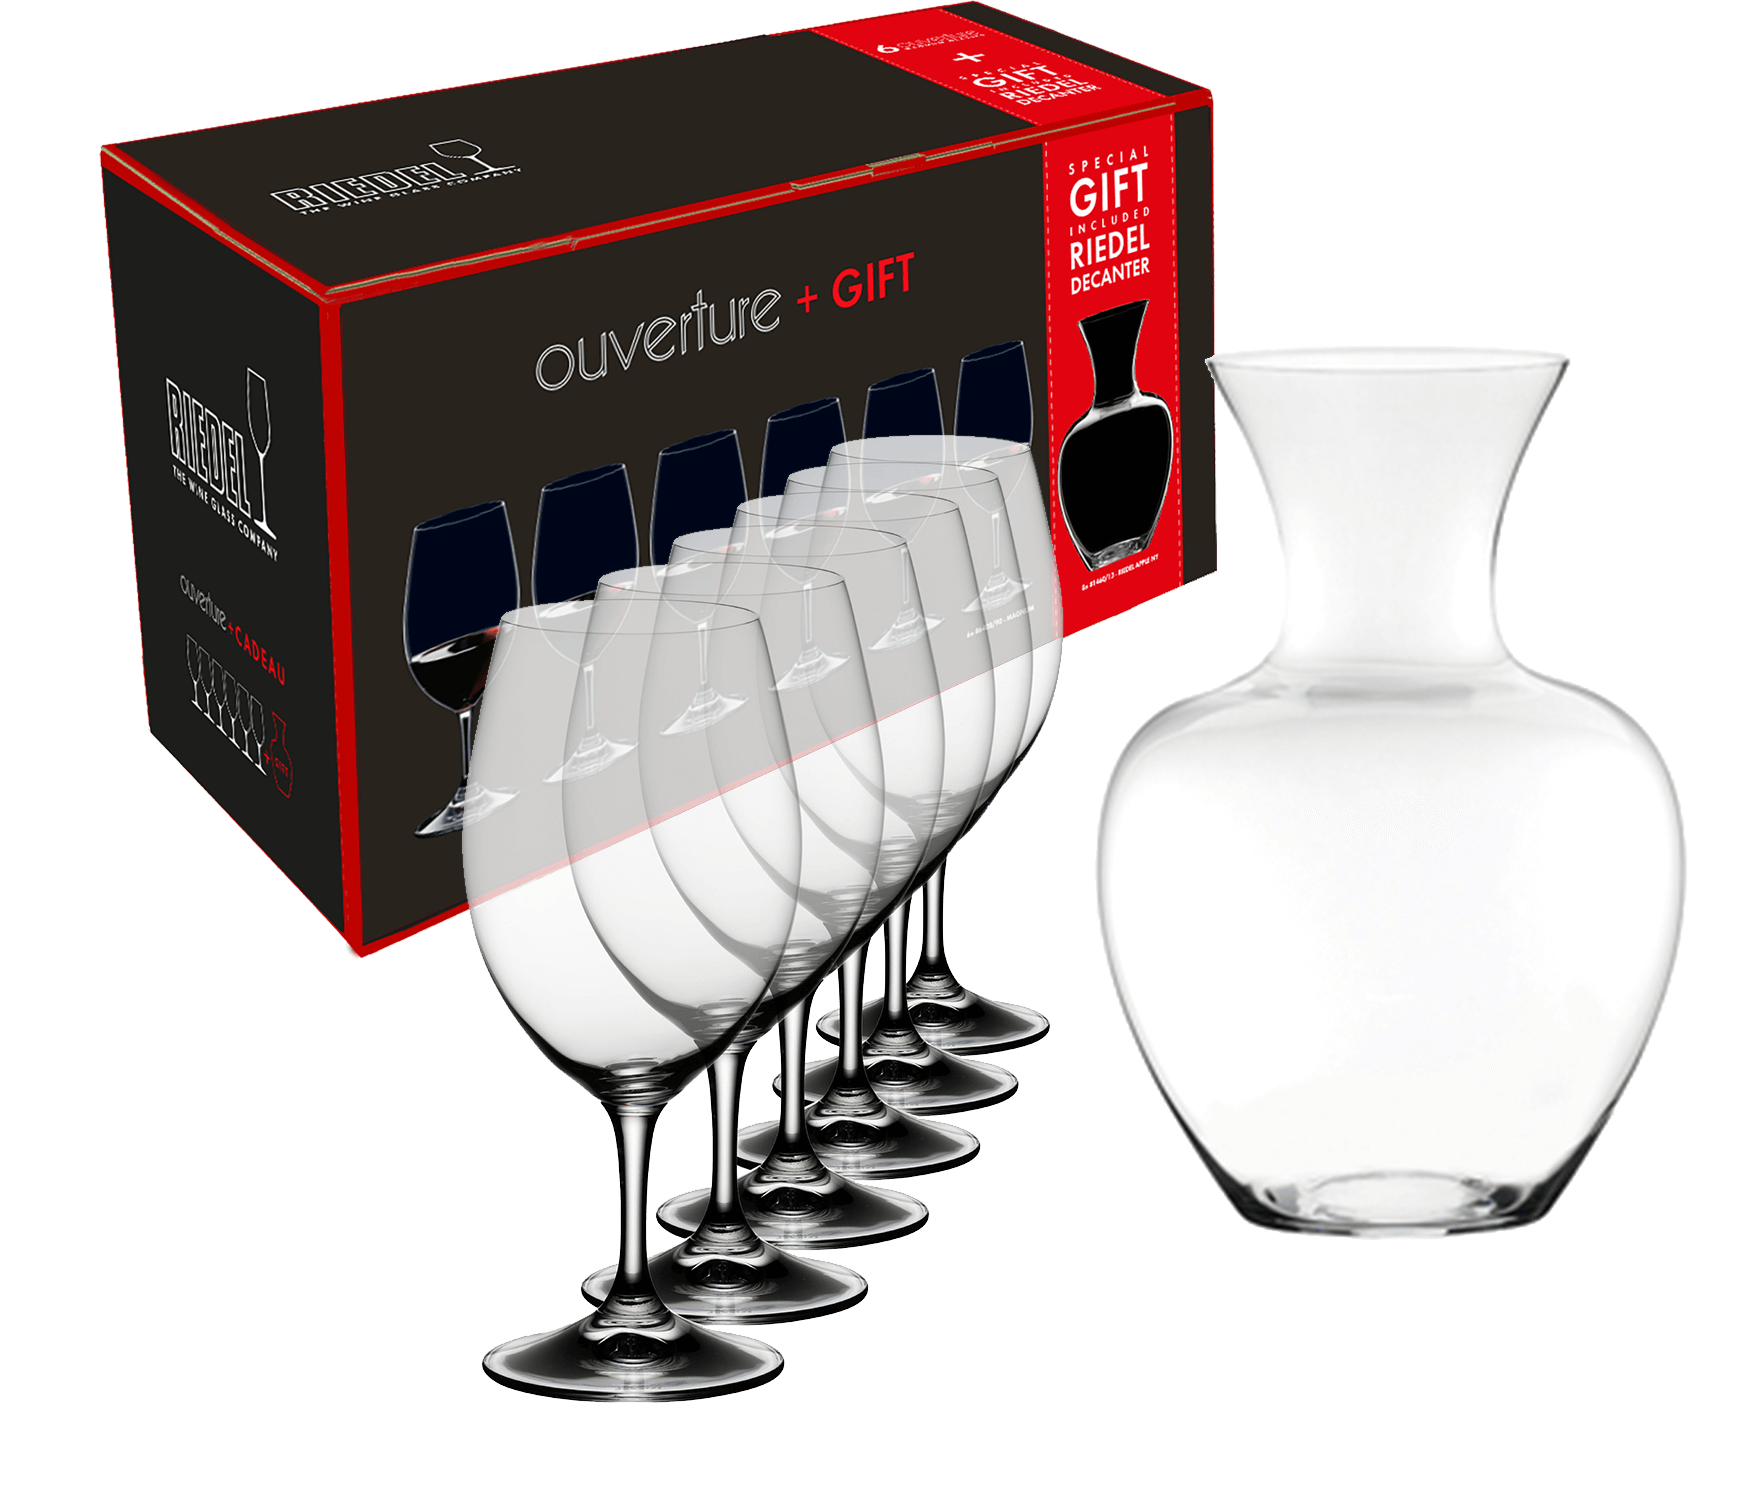 Riedel Ouverture Magnum (6 glasses set) and decanter Apple